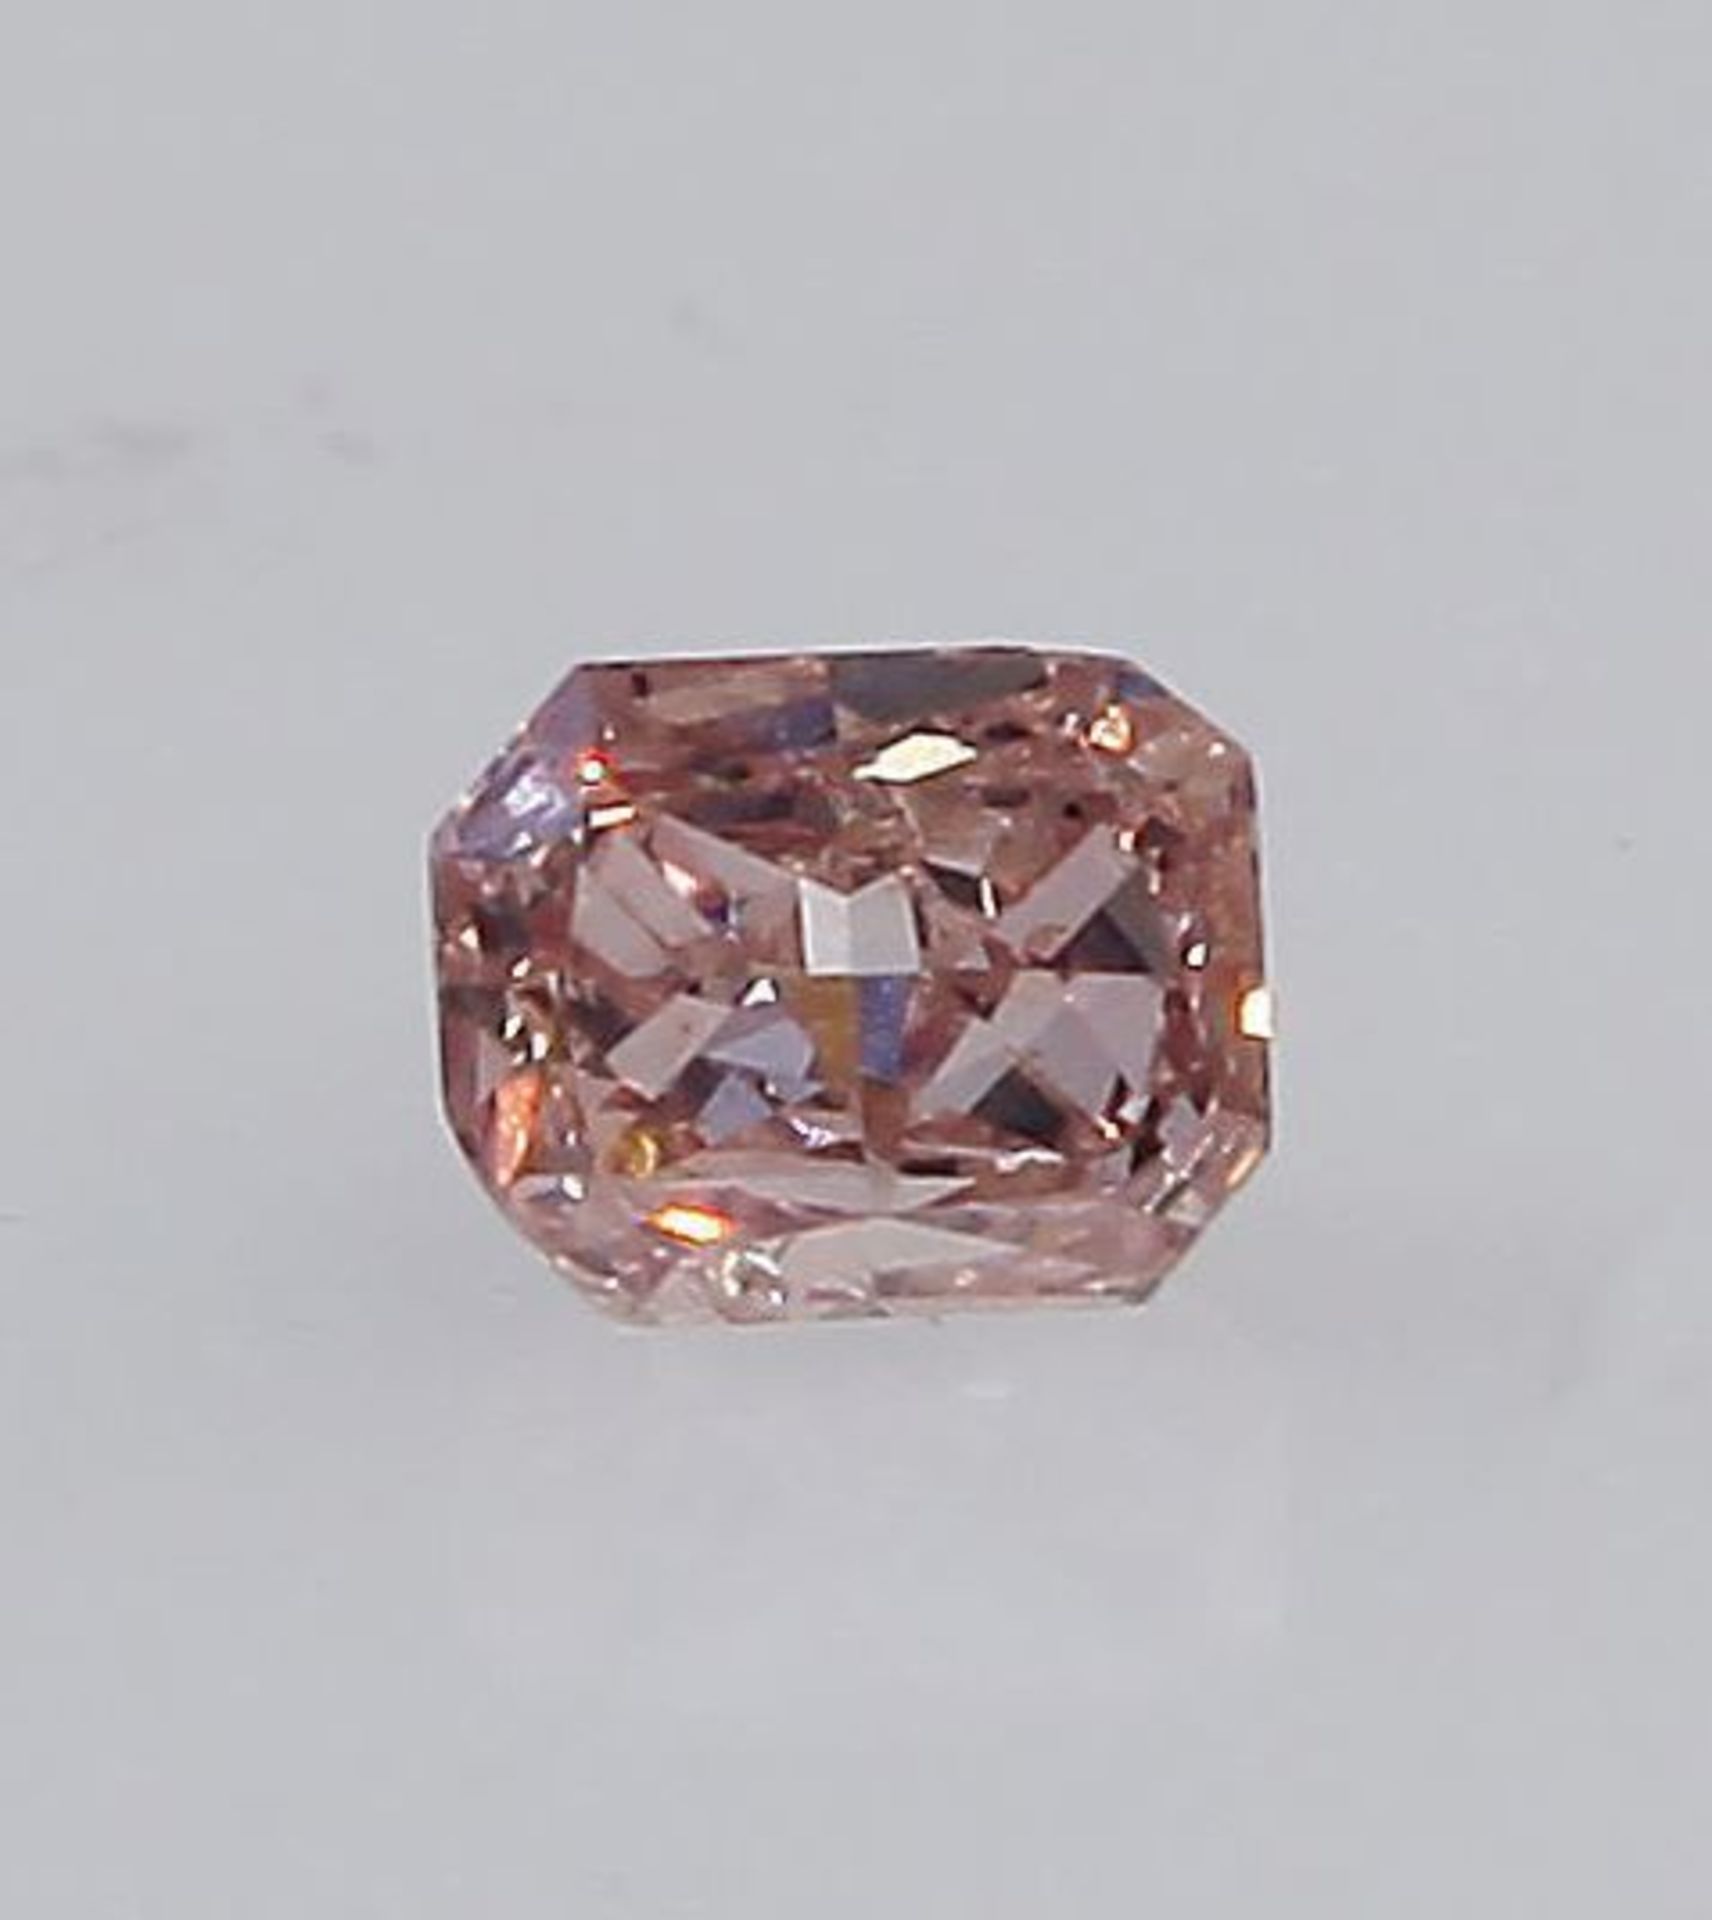 GIA Certified 0.08 ct. Fancy Orangy Pink Diamond - Image 5 of 10